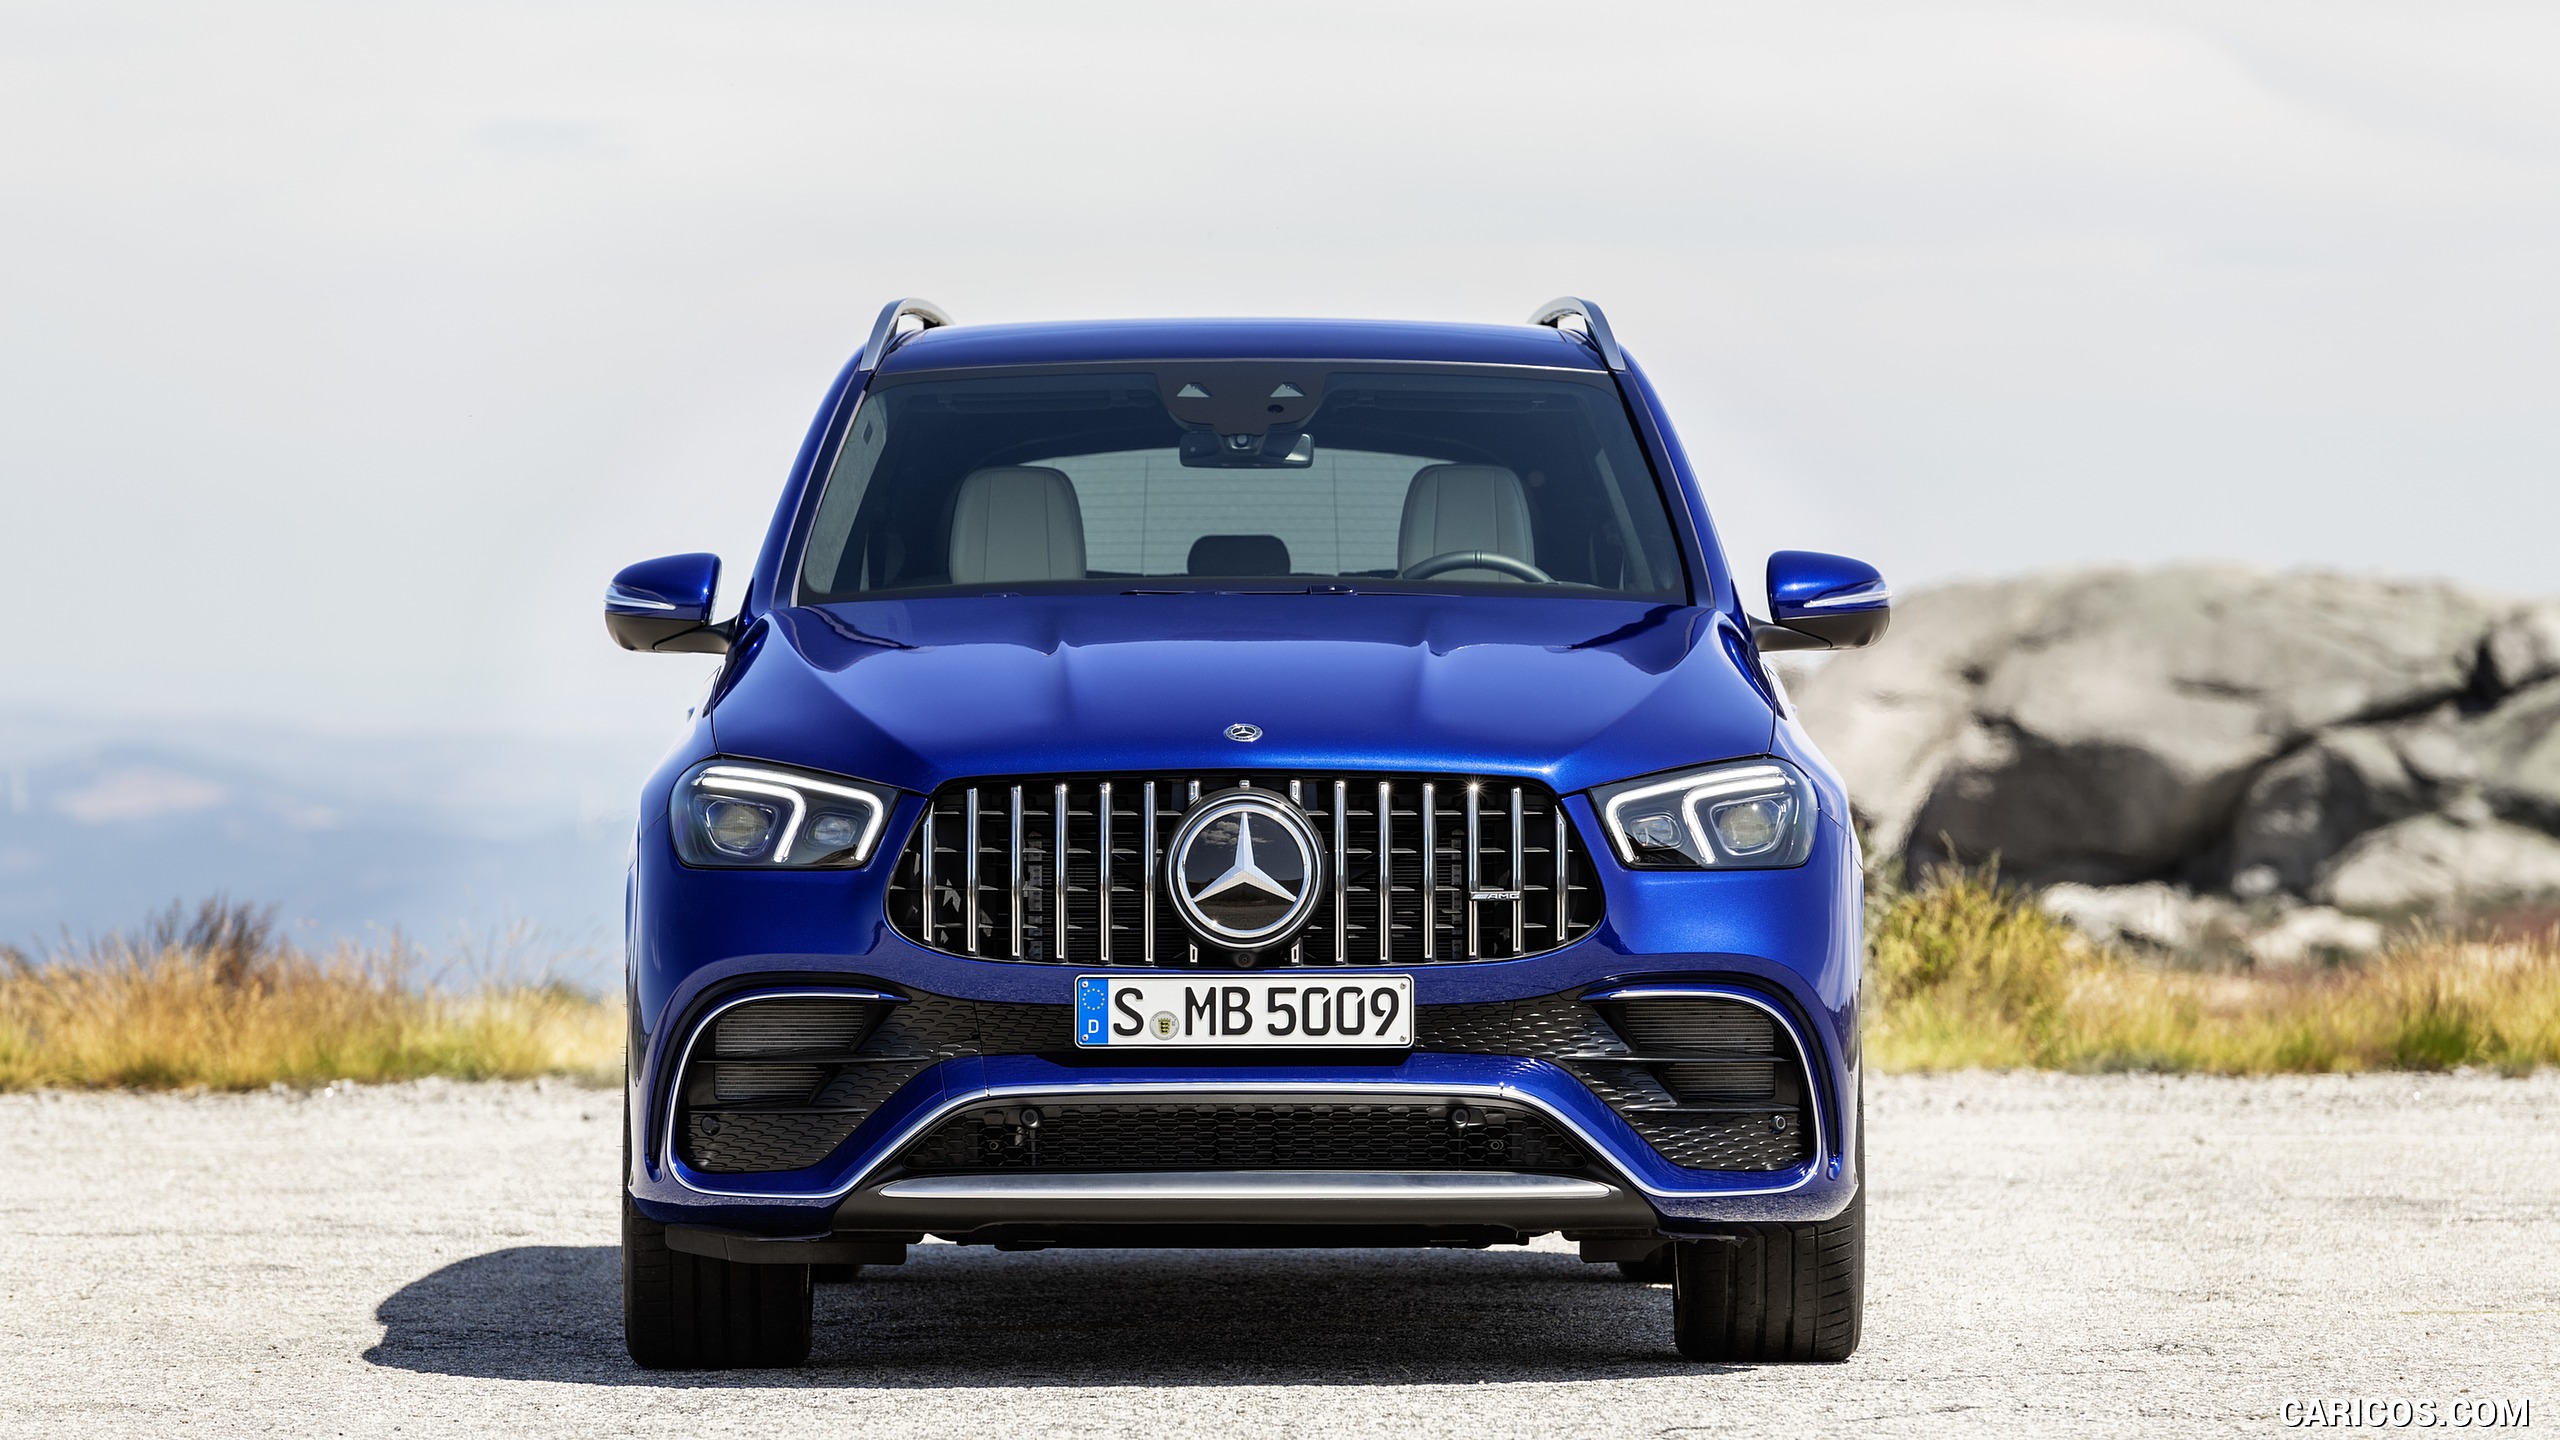 2021 Mercedes-AMG GLE 63 S 4MATIC - Front, #17 of 187